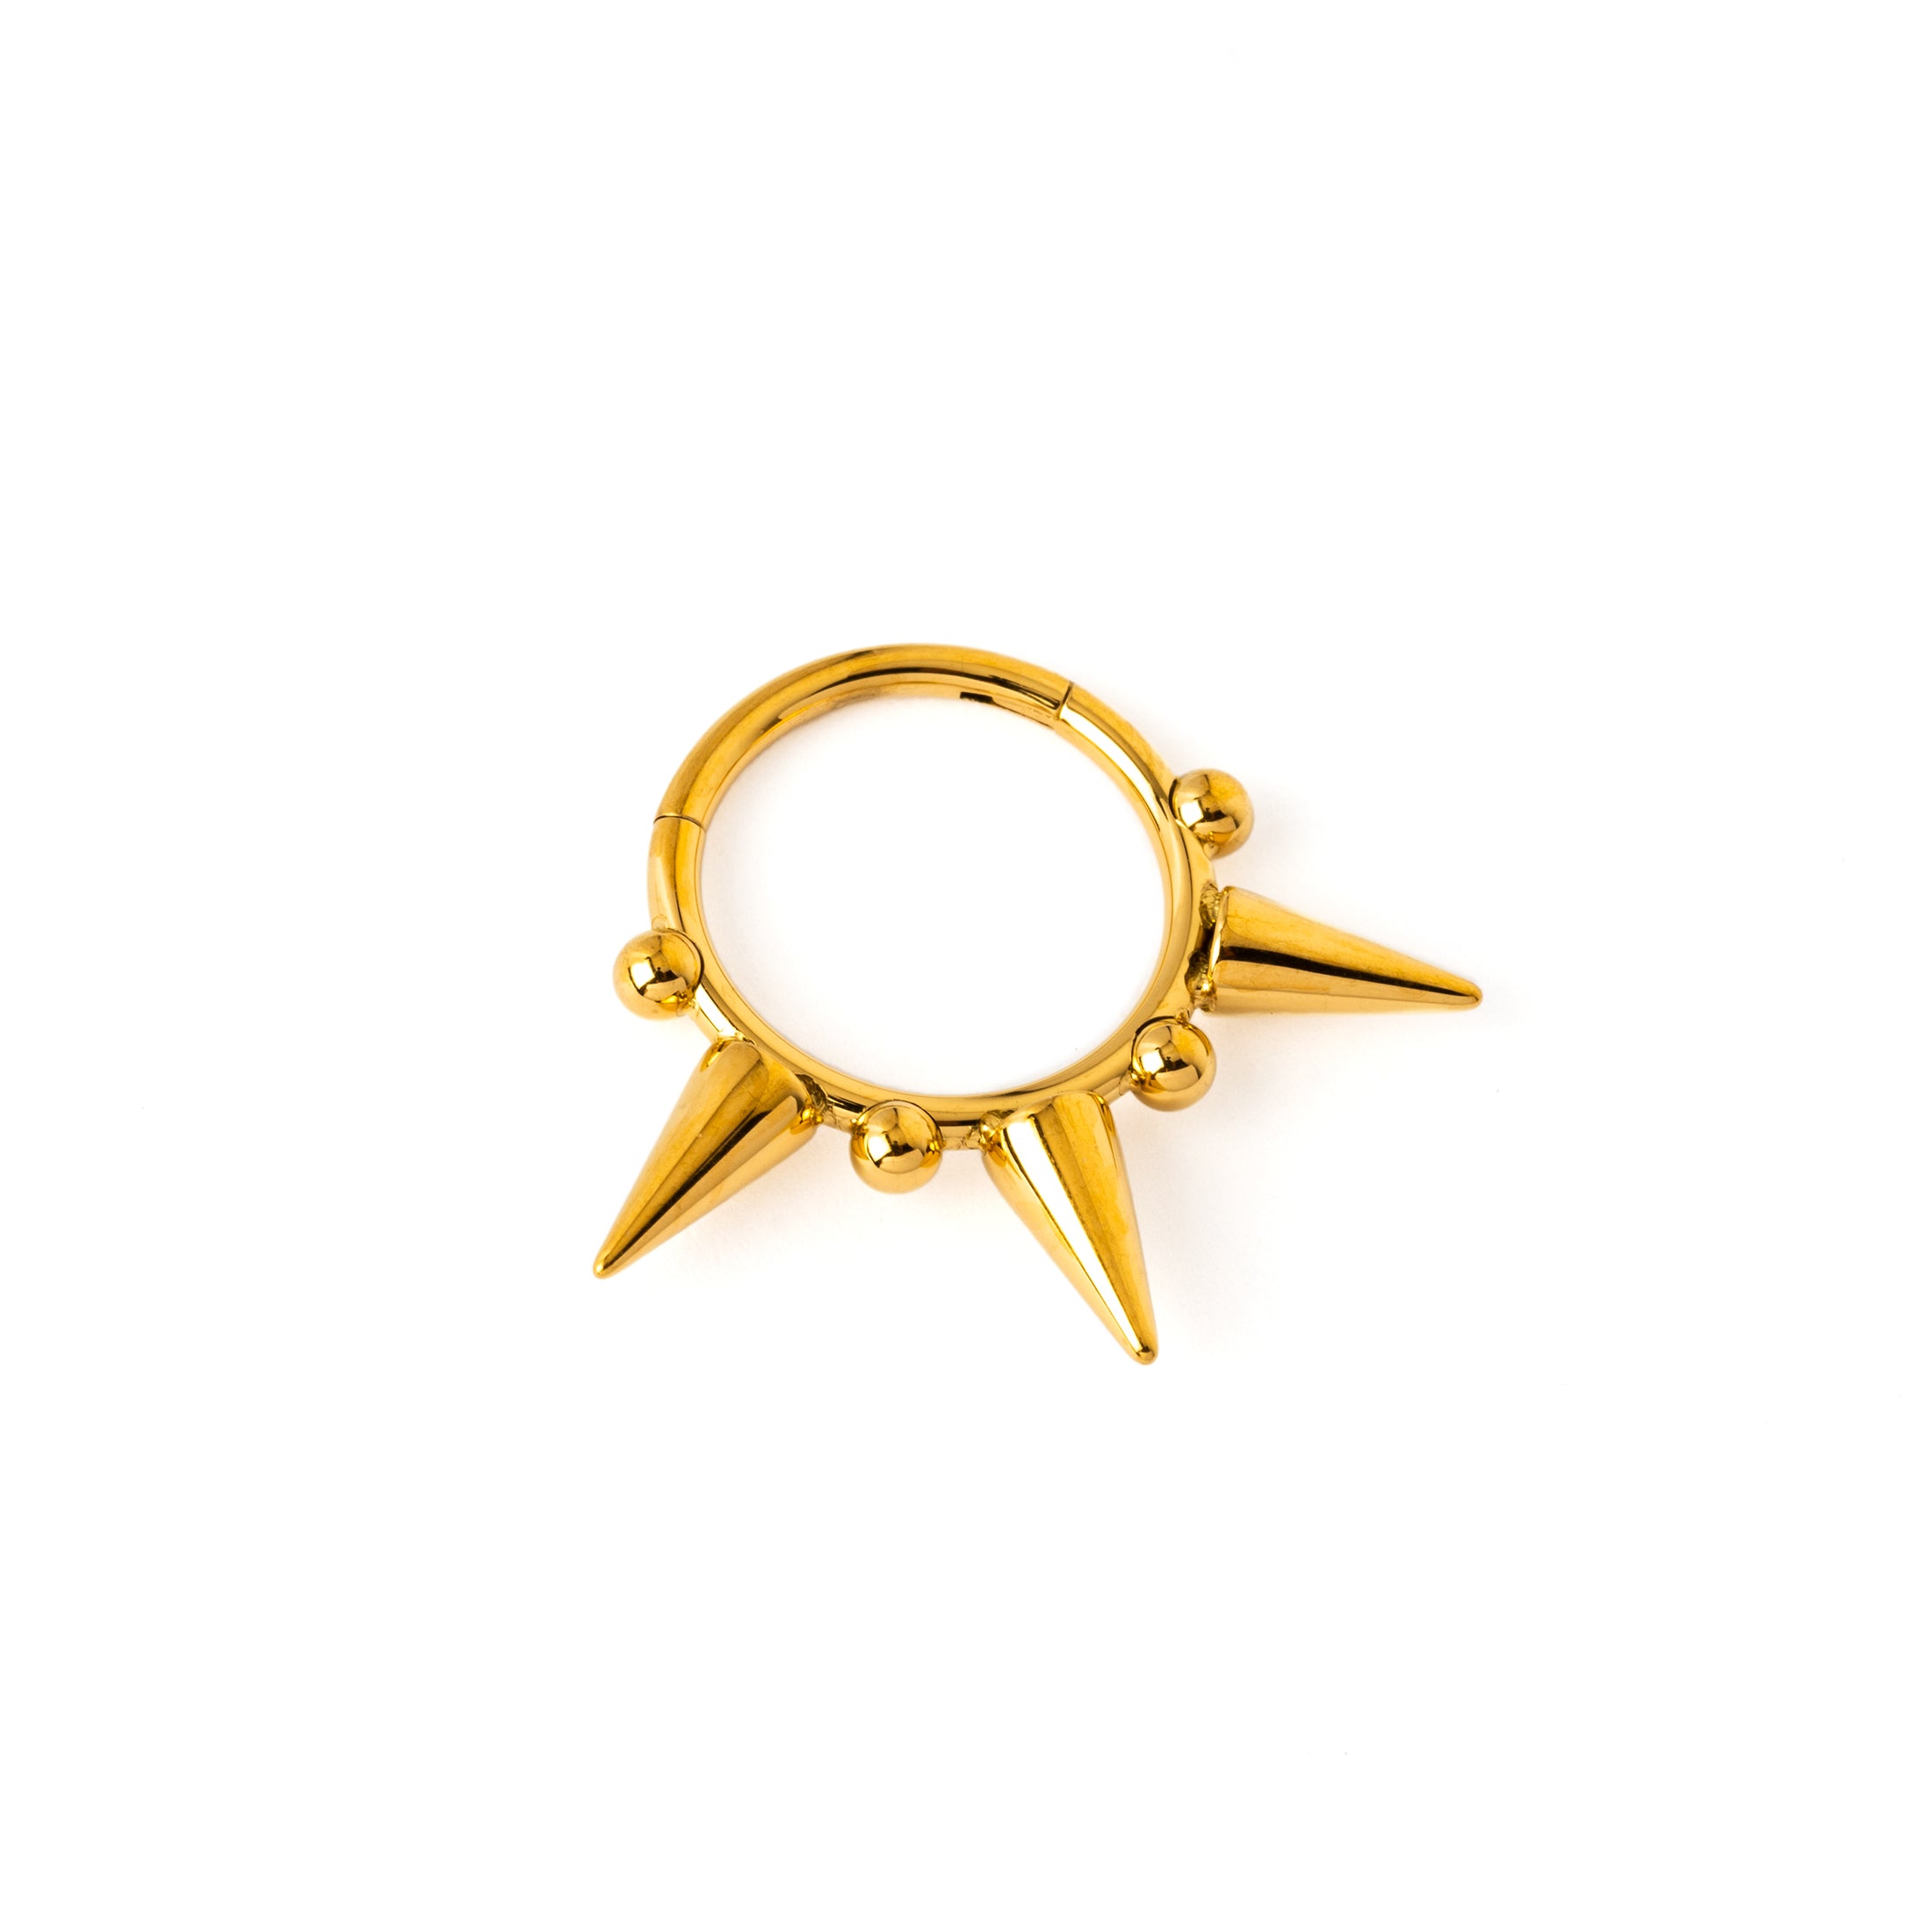 Golden surgical steel Spikes Septum Clicker ring left side view